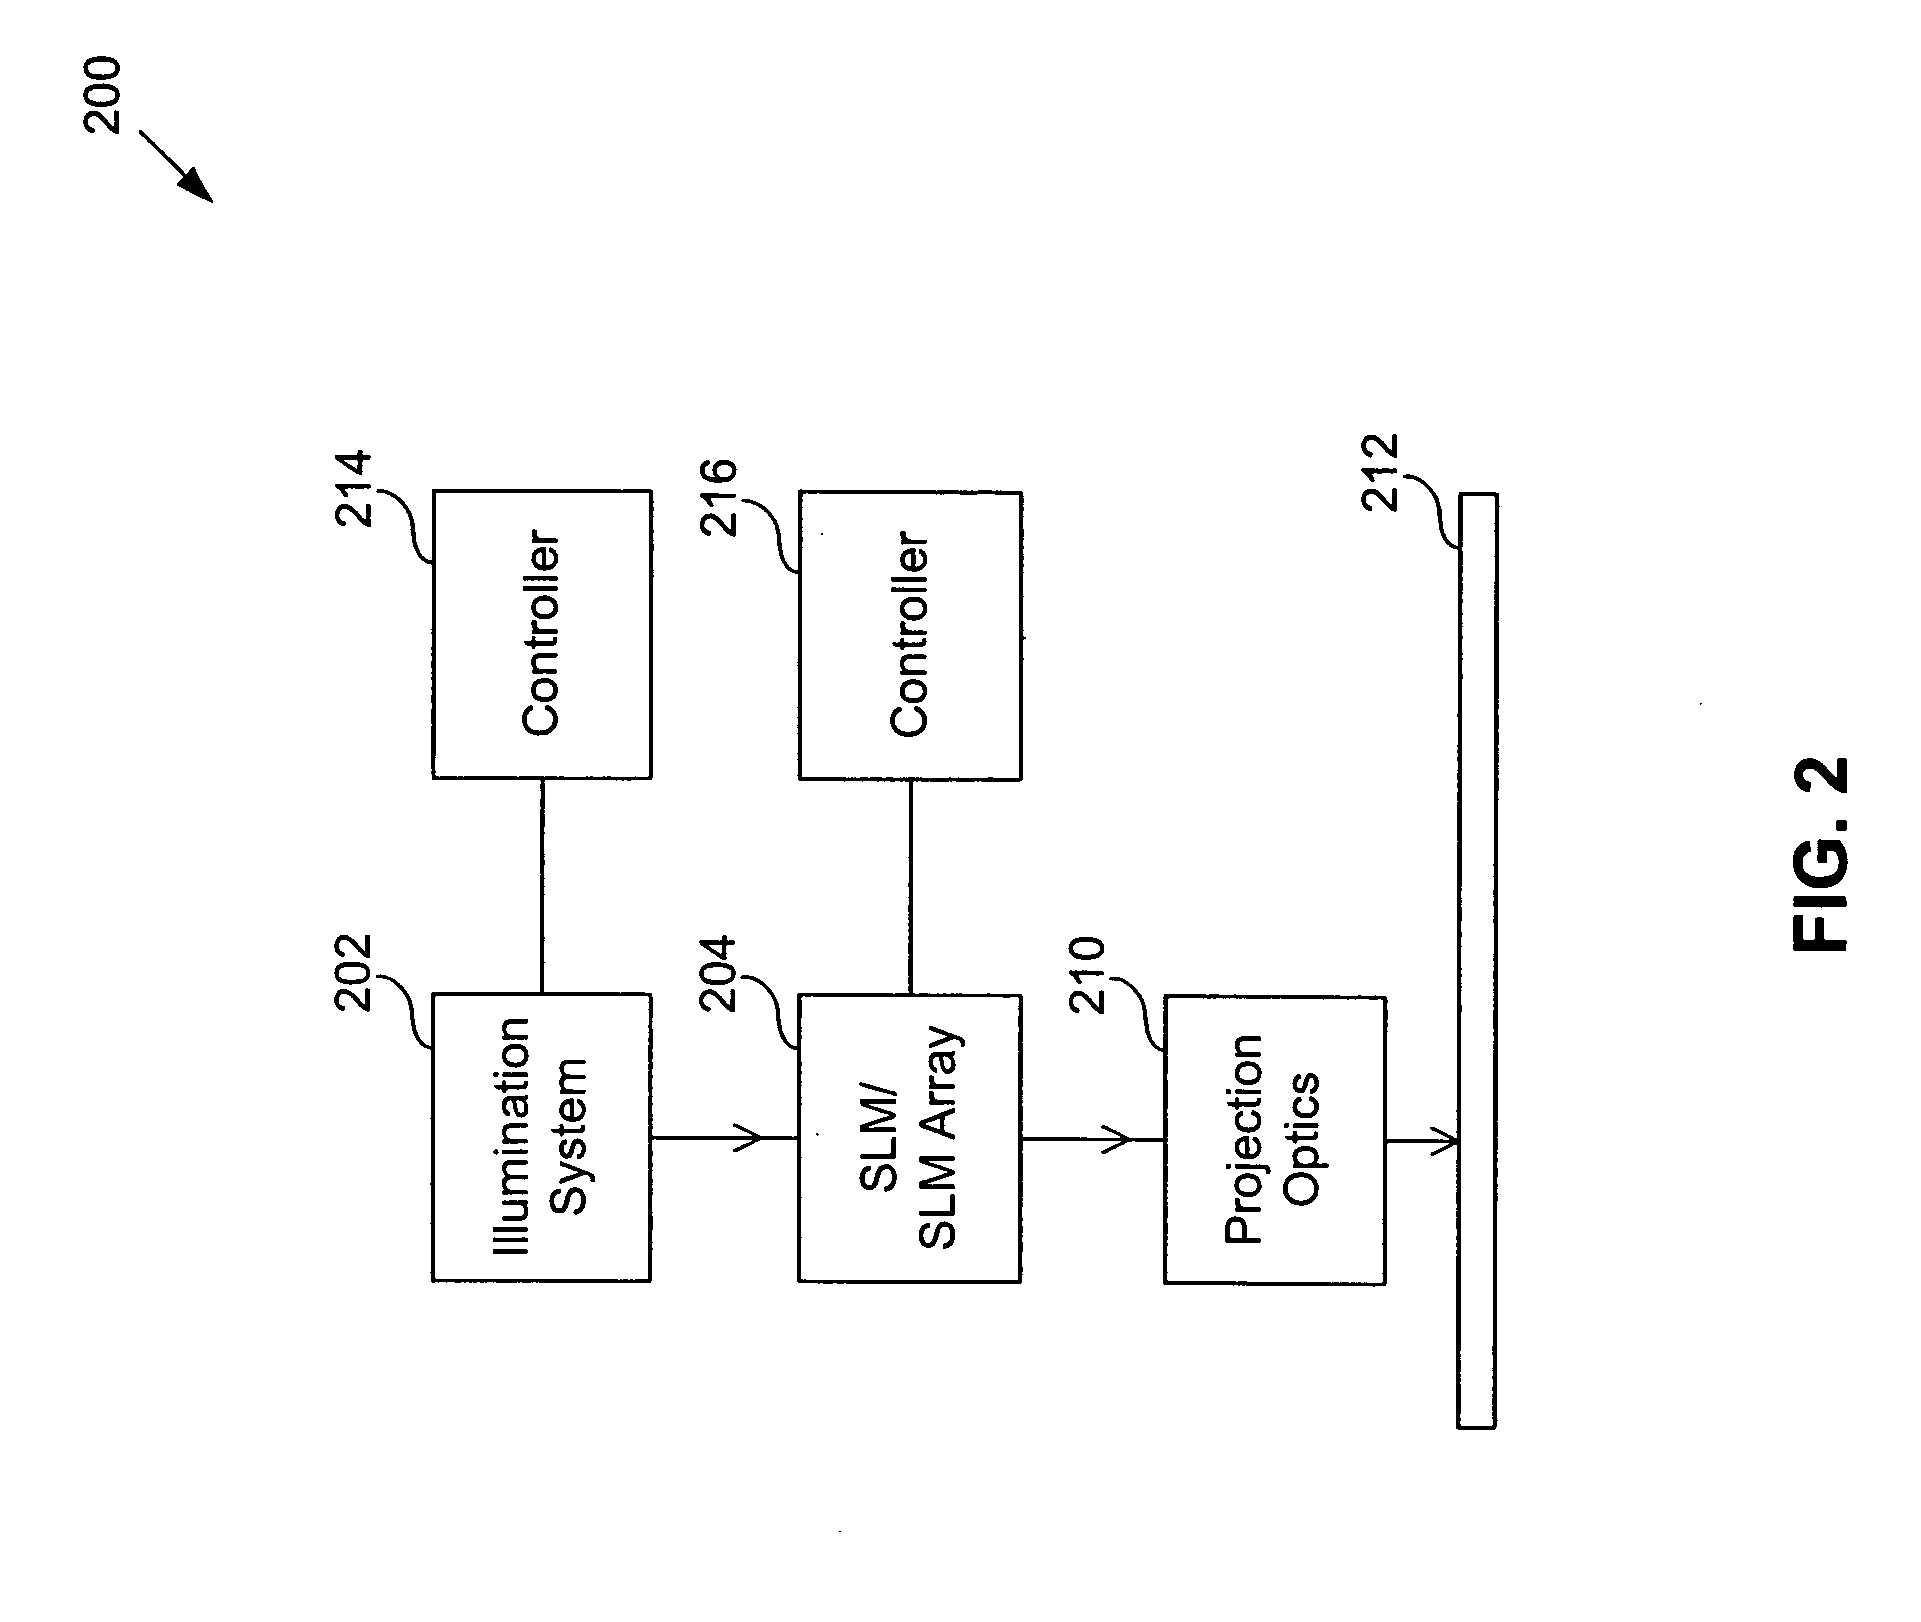 Maskless lithography systems and methods utilizing spatial light modulator arrays